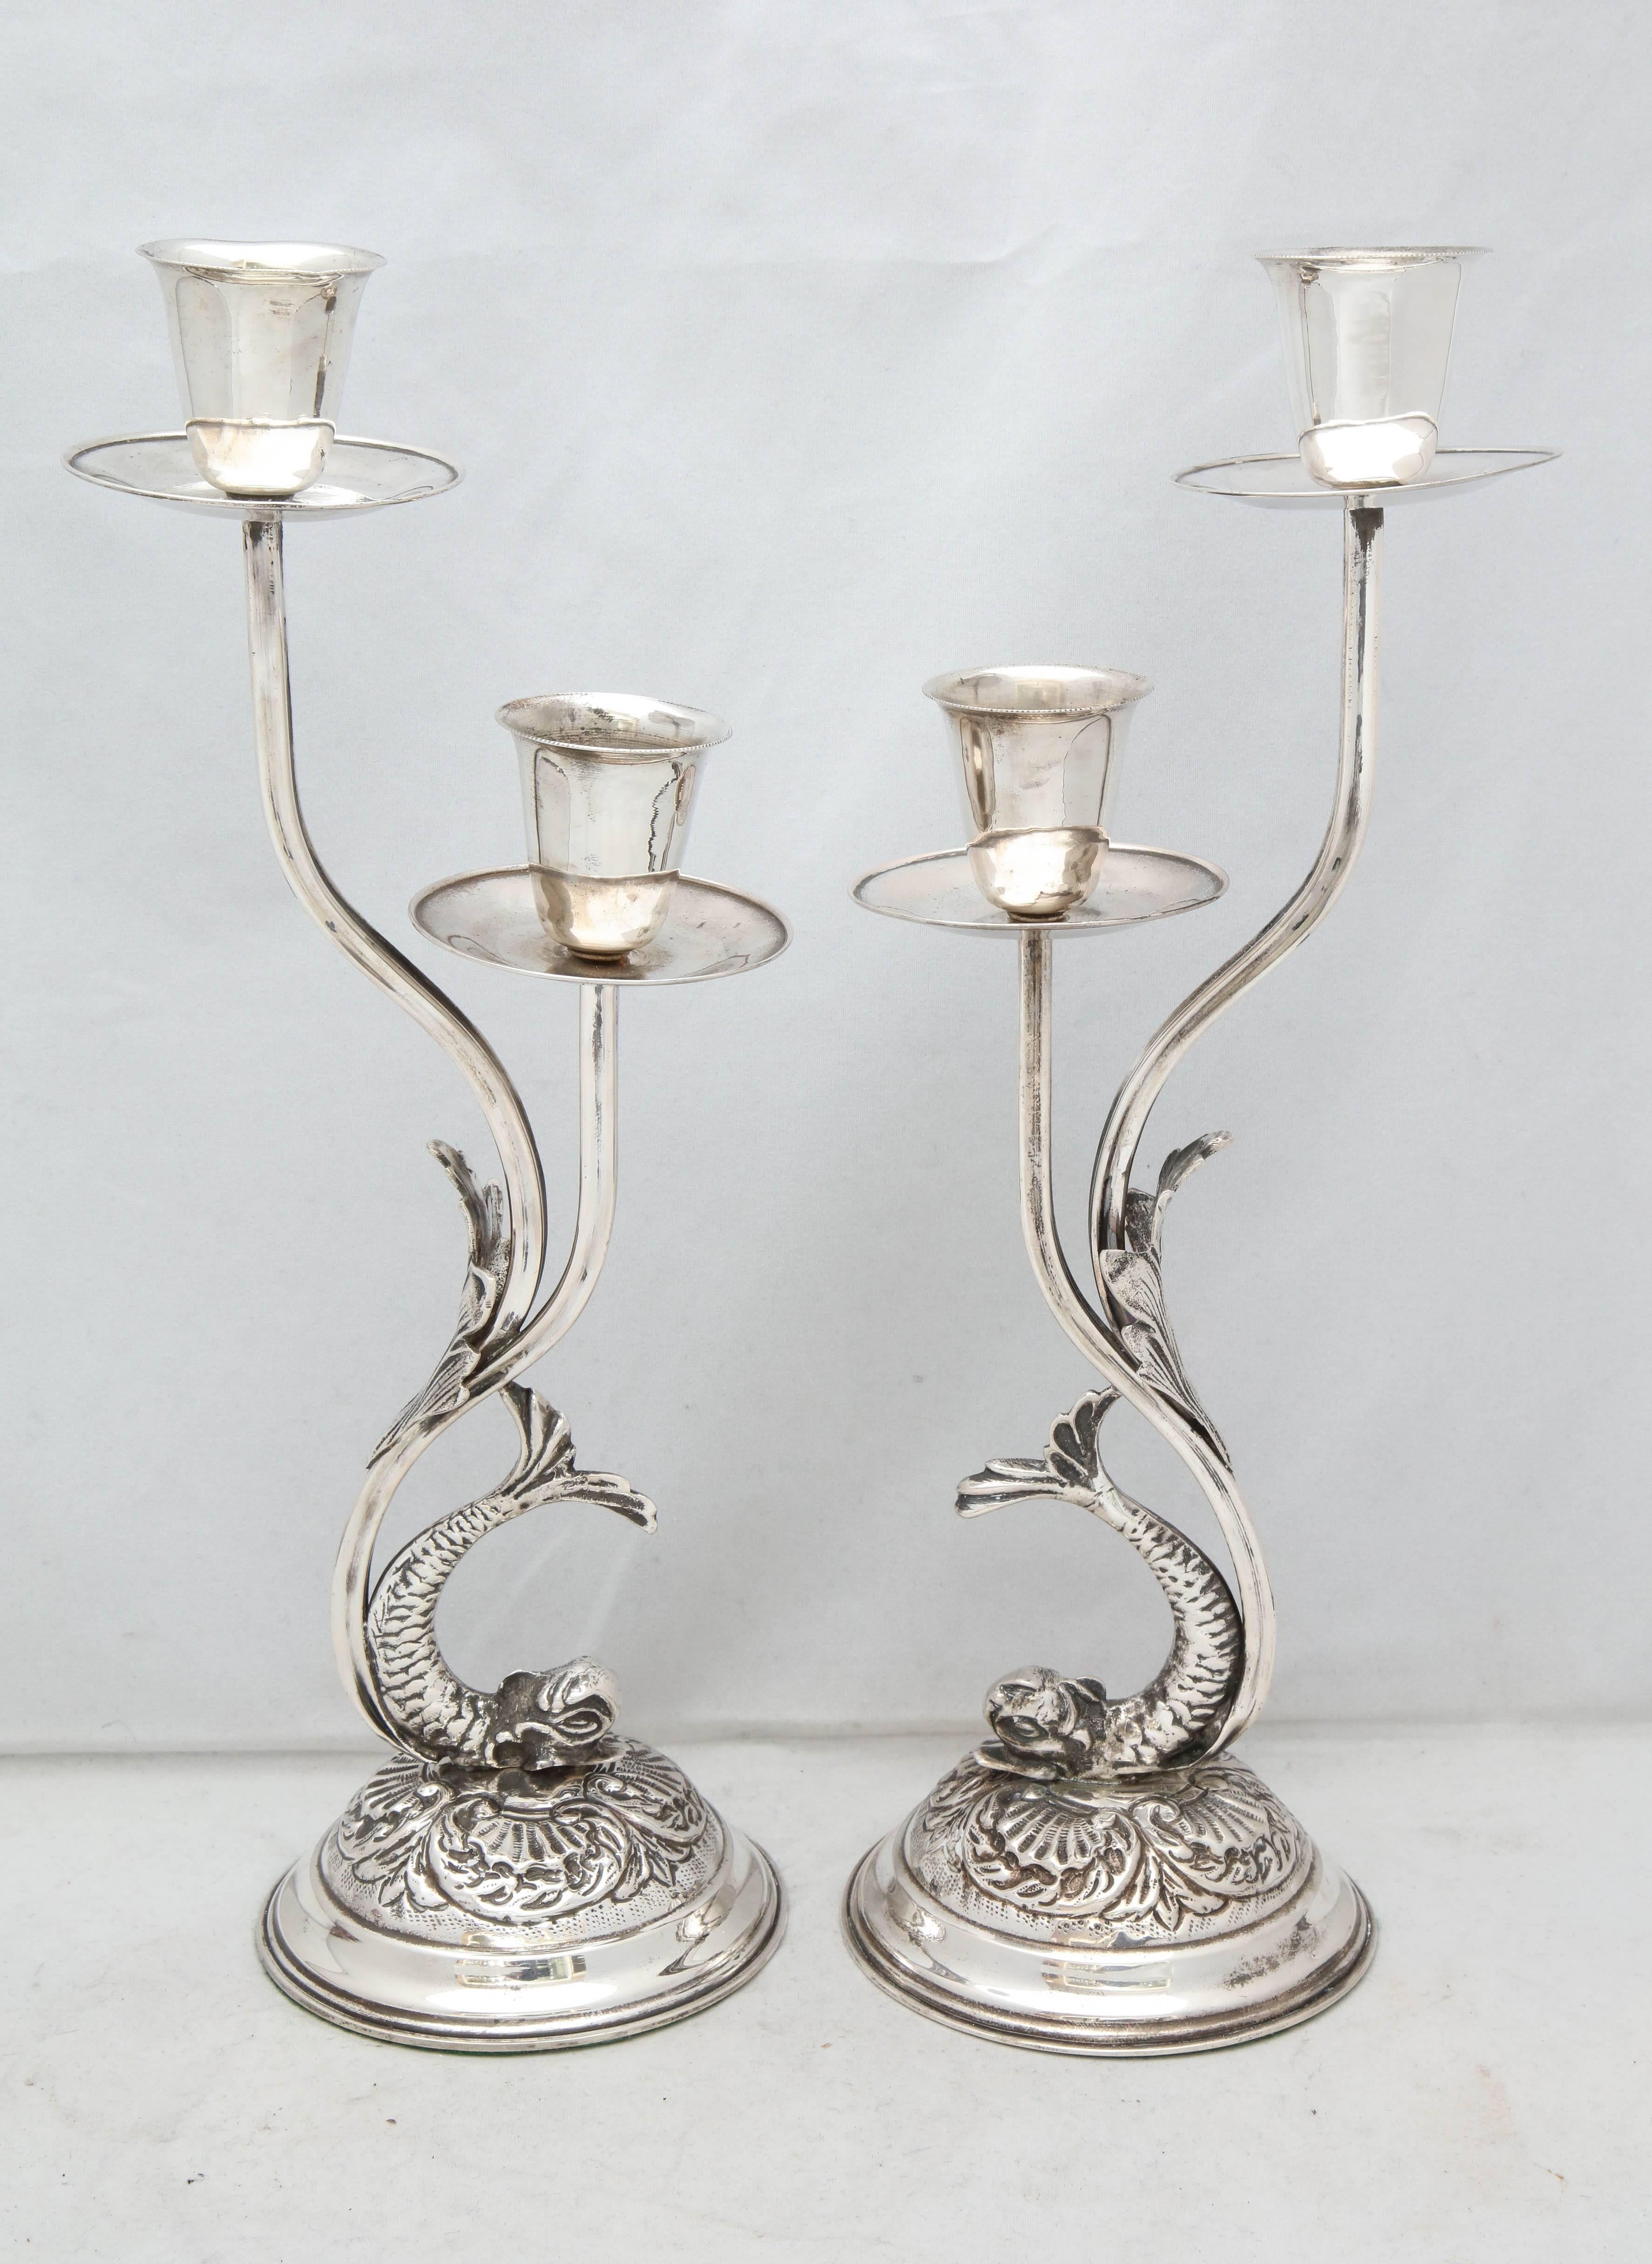 Unusual pair of Art Nouveau style Continental Silver (.800), Dolphin-form candlesticks, European, circa 1930s. Dolphins and sea flora form the column of each candlestick, which will take two candles. Each candle cup has a beaded rim and a pricket